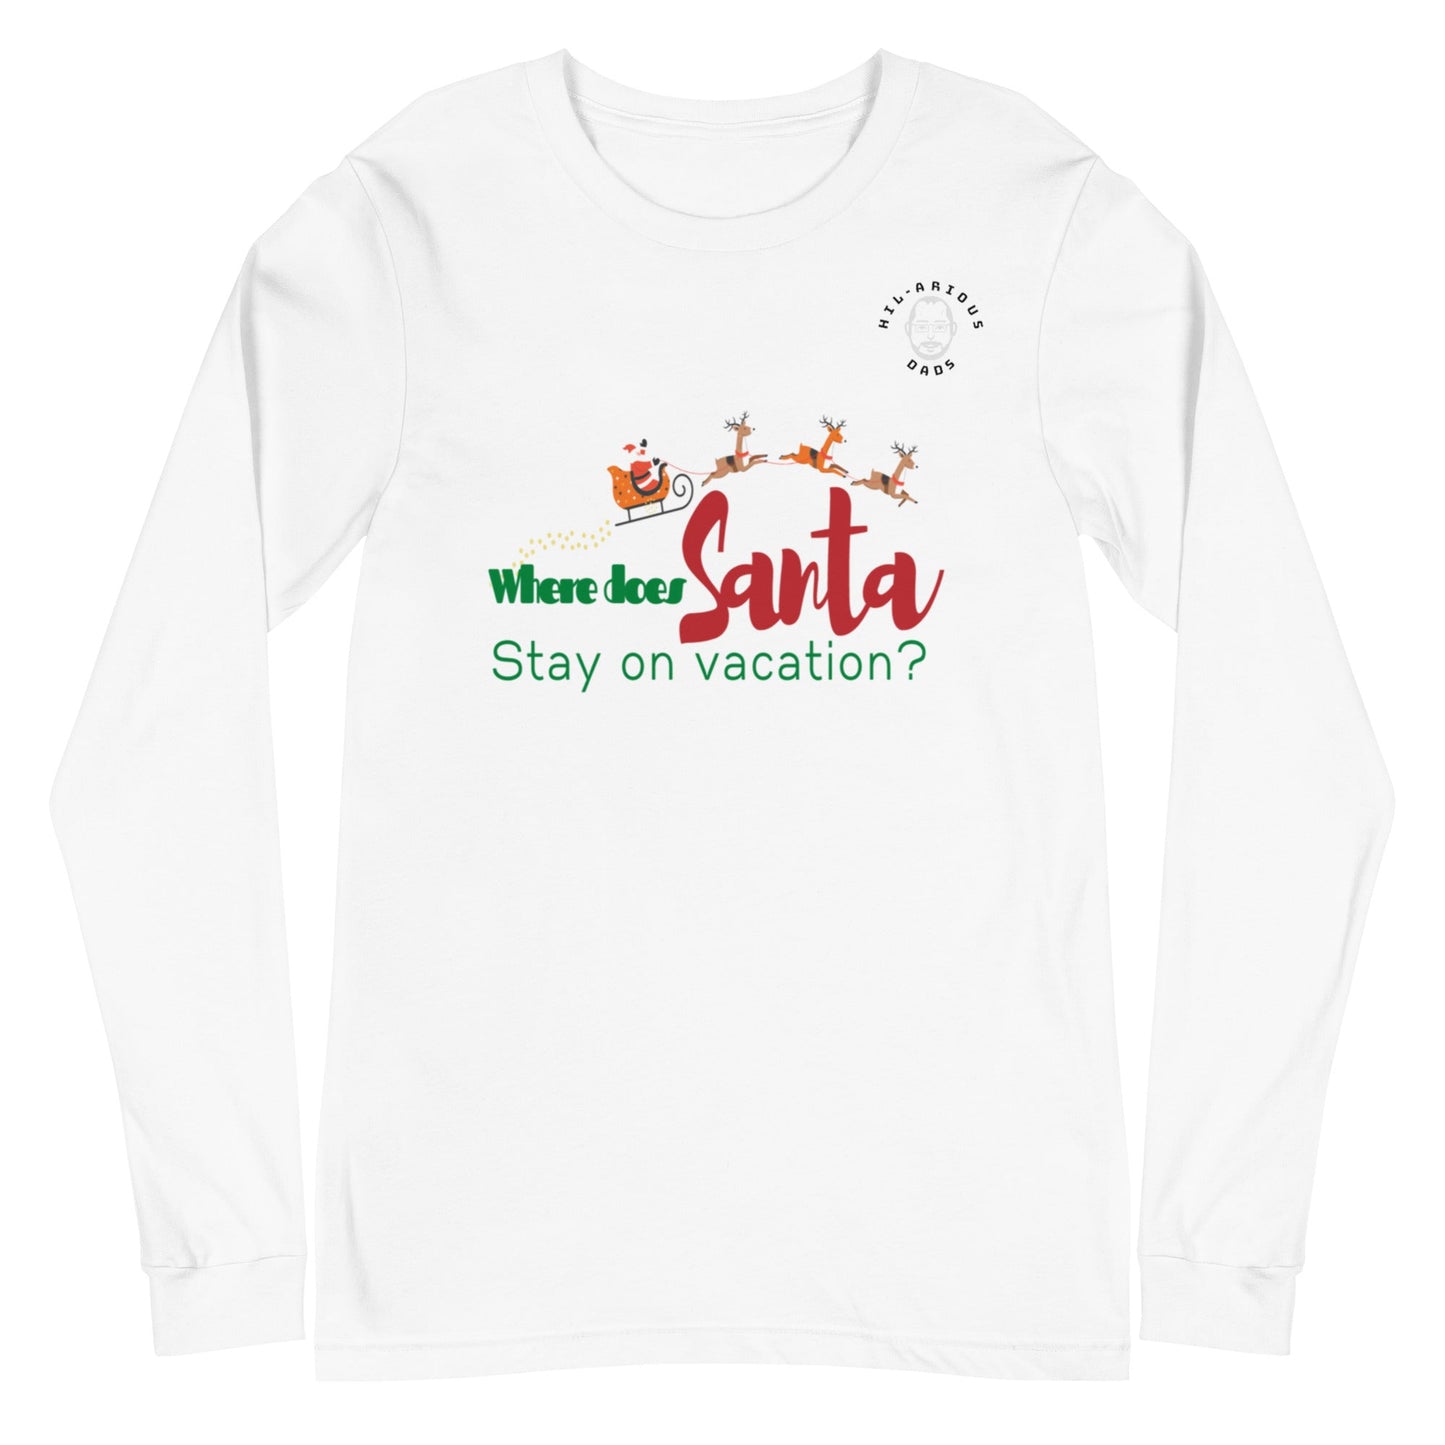 Where does Santa stay on vacation?-Long Sleeve Tee - Hil-arious Dads